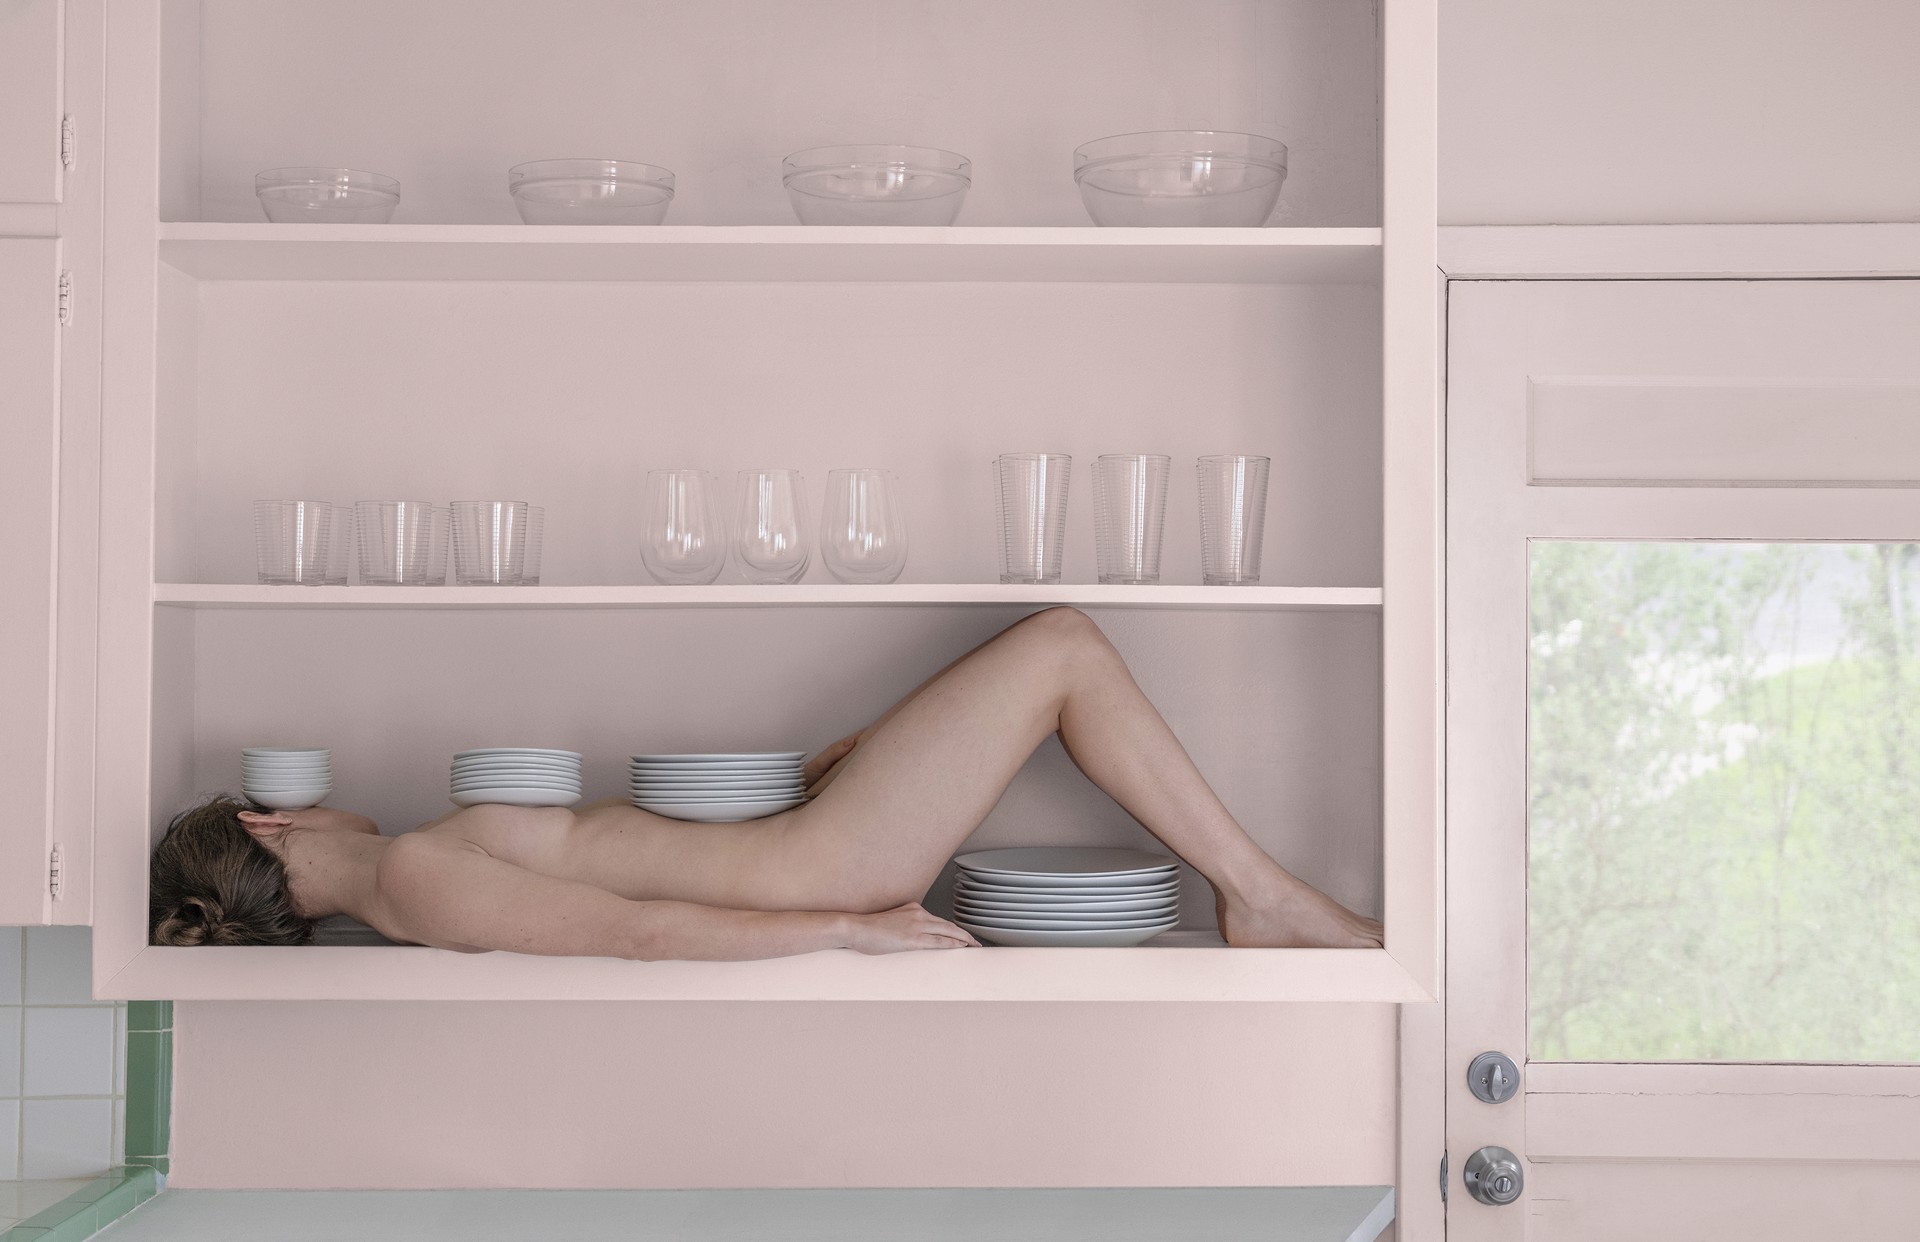 Everything But the Kitchen Sink by Brooke Didonato